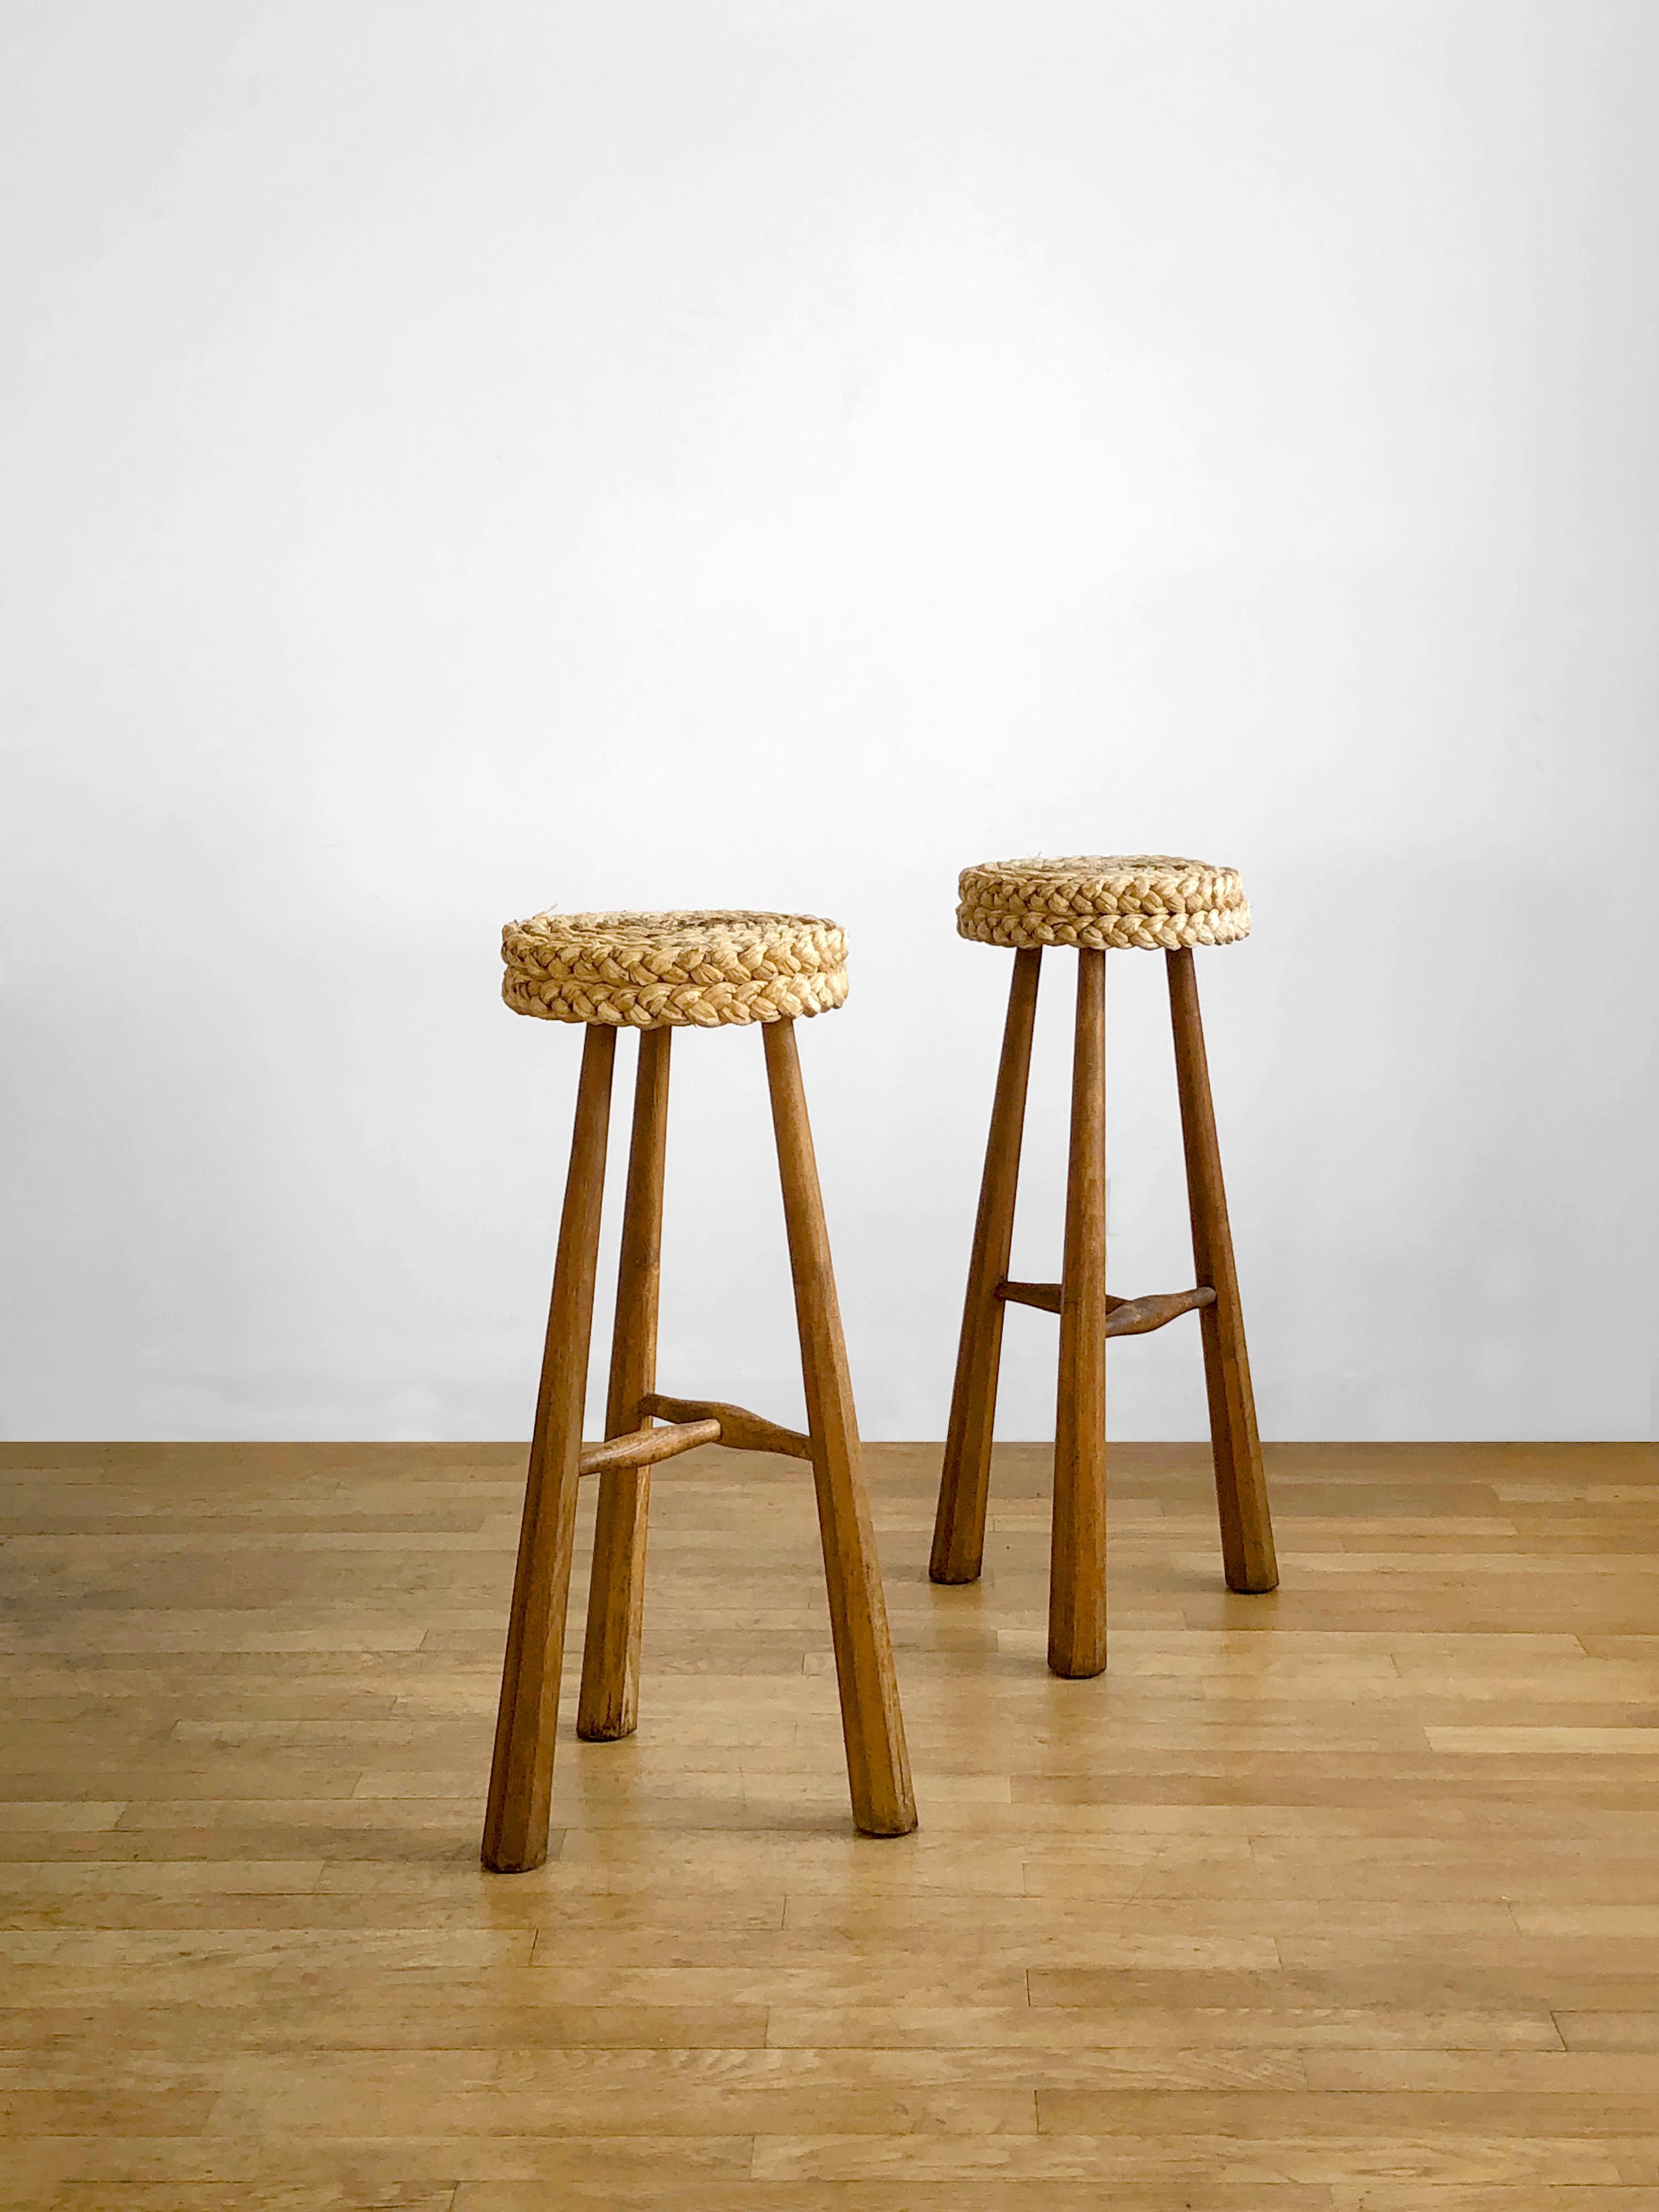 A PAIR OF BRUTALIST BAR STOOLS by AUDOUX-MINNET, France, 1950 For Sale 2